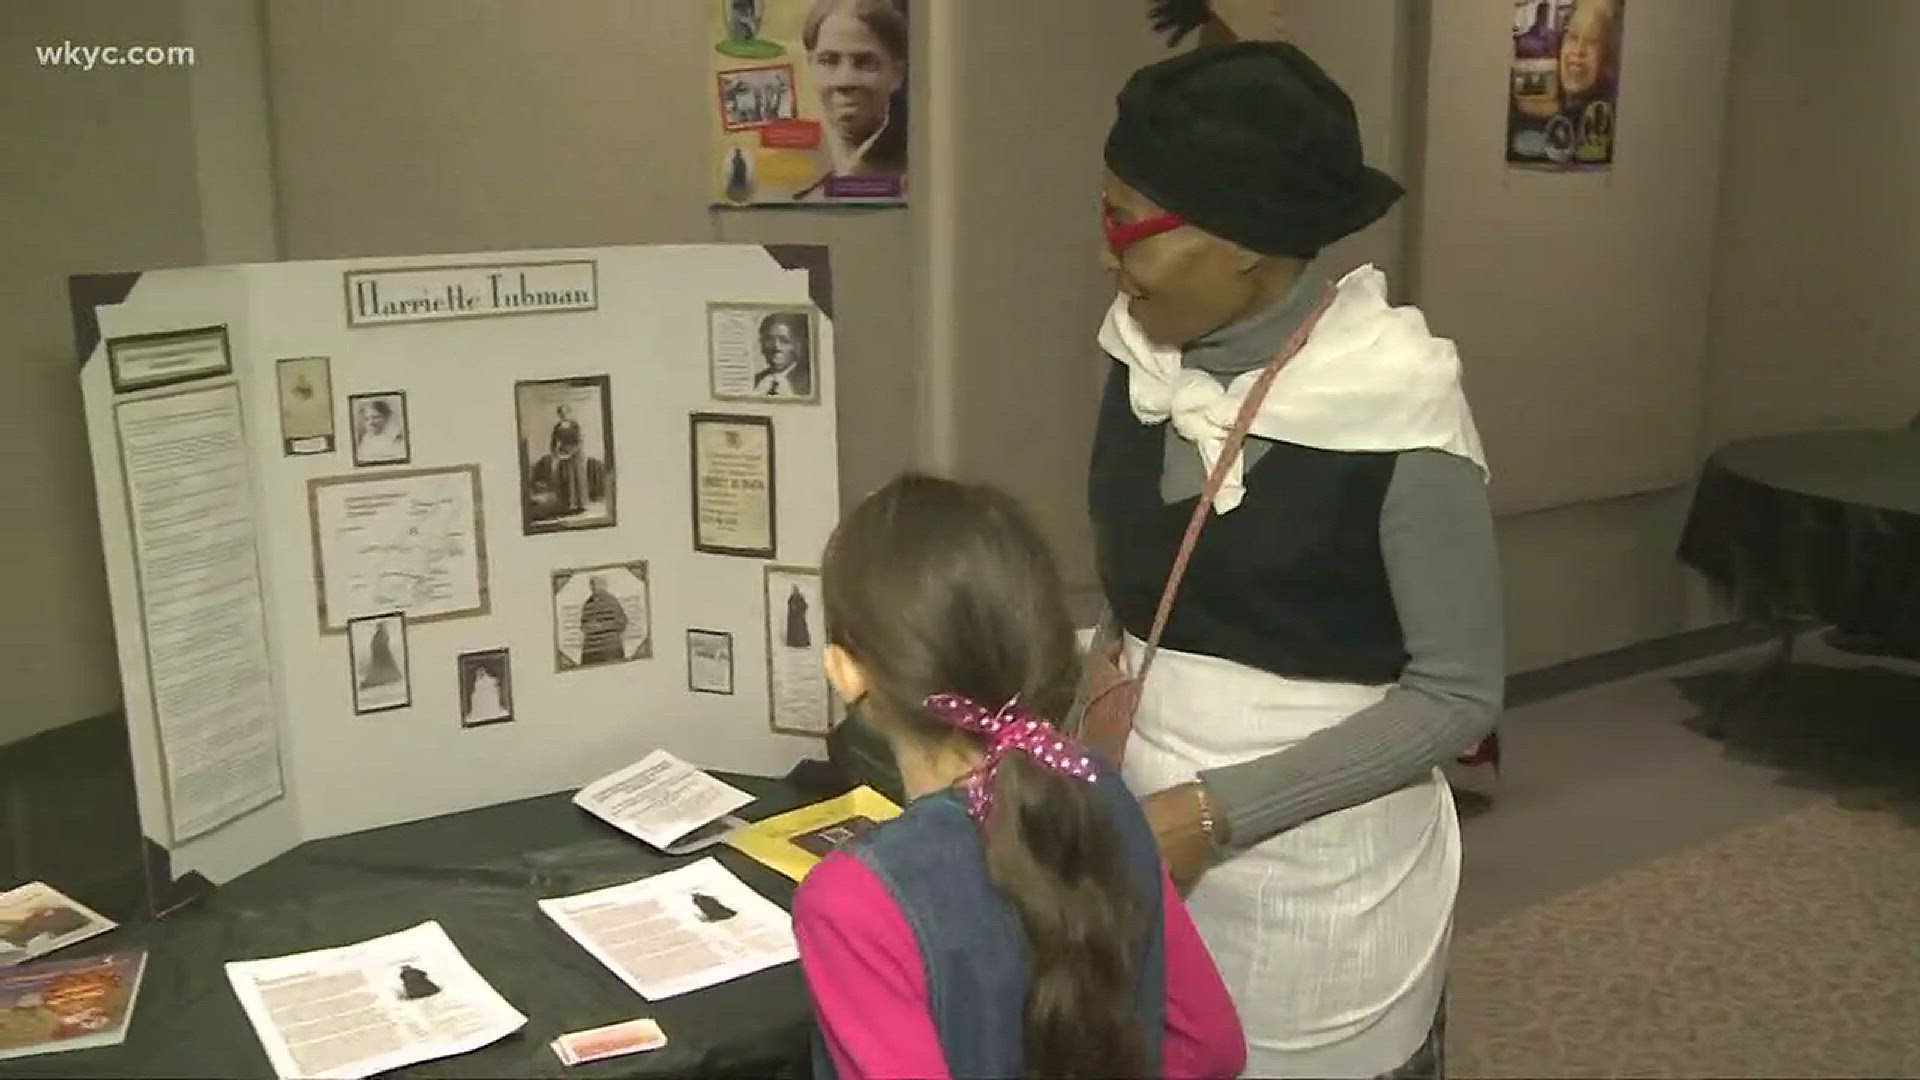 Living History museum took place at Cuyahoga Falls church